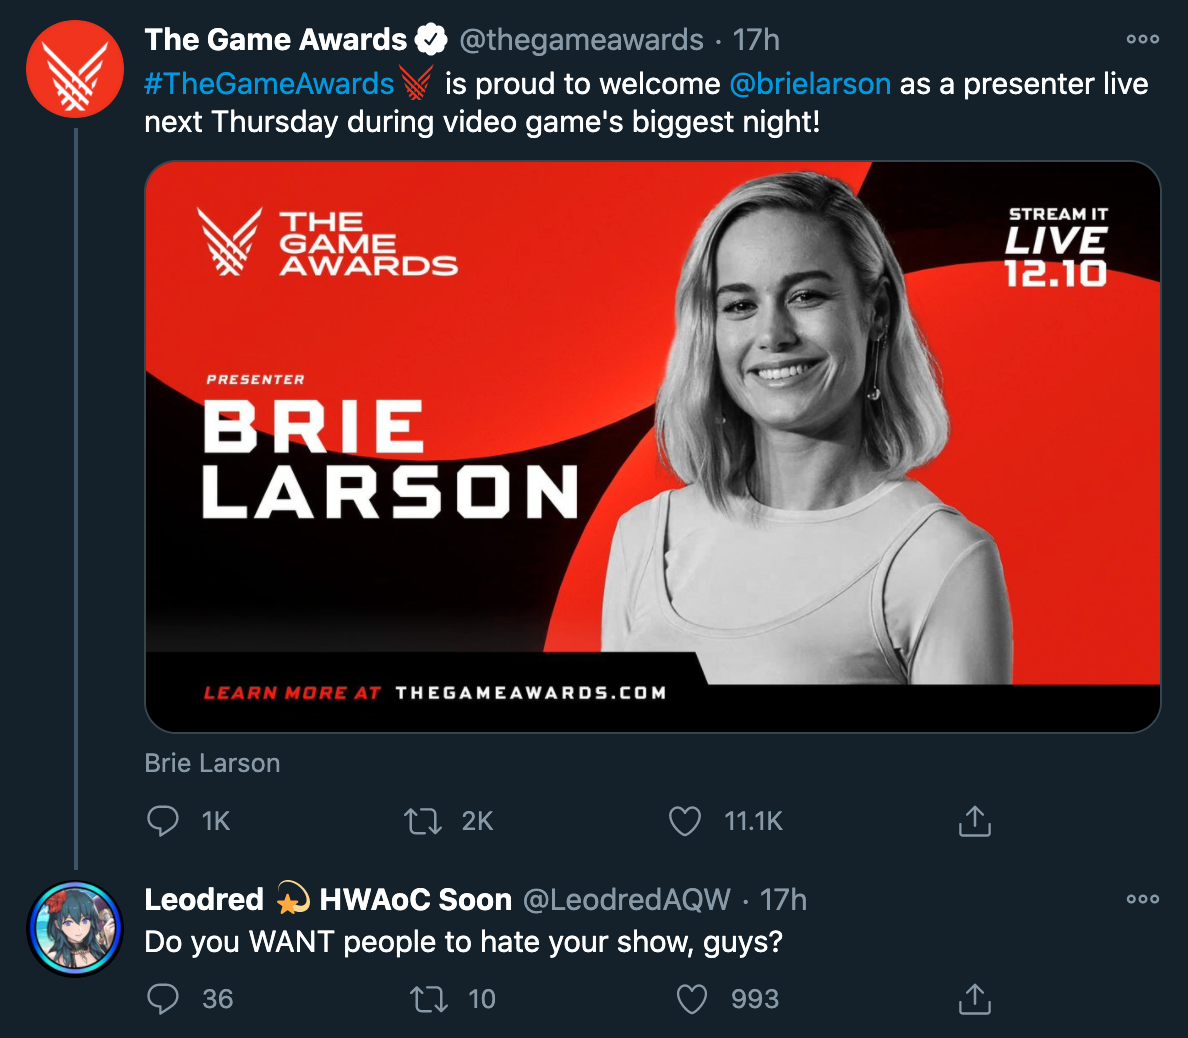 The Game Awards  is proud to welcome as a presenter Brie Larson